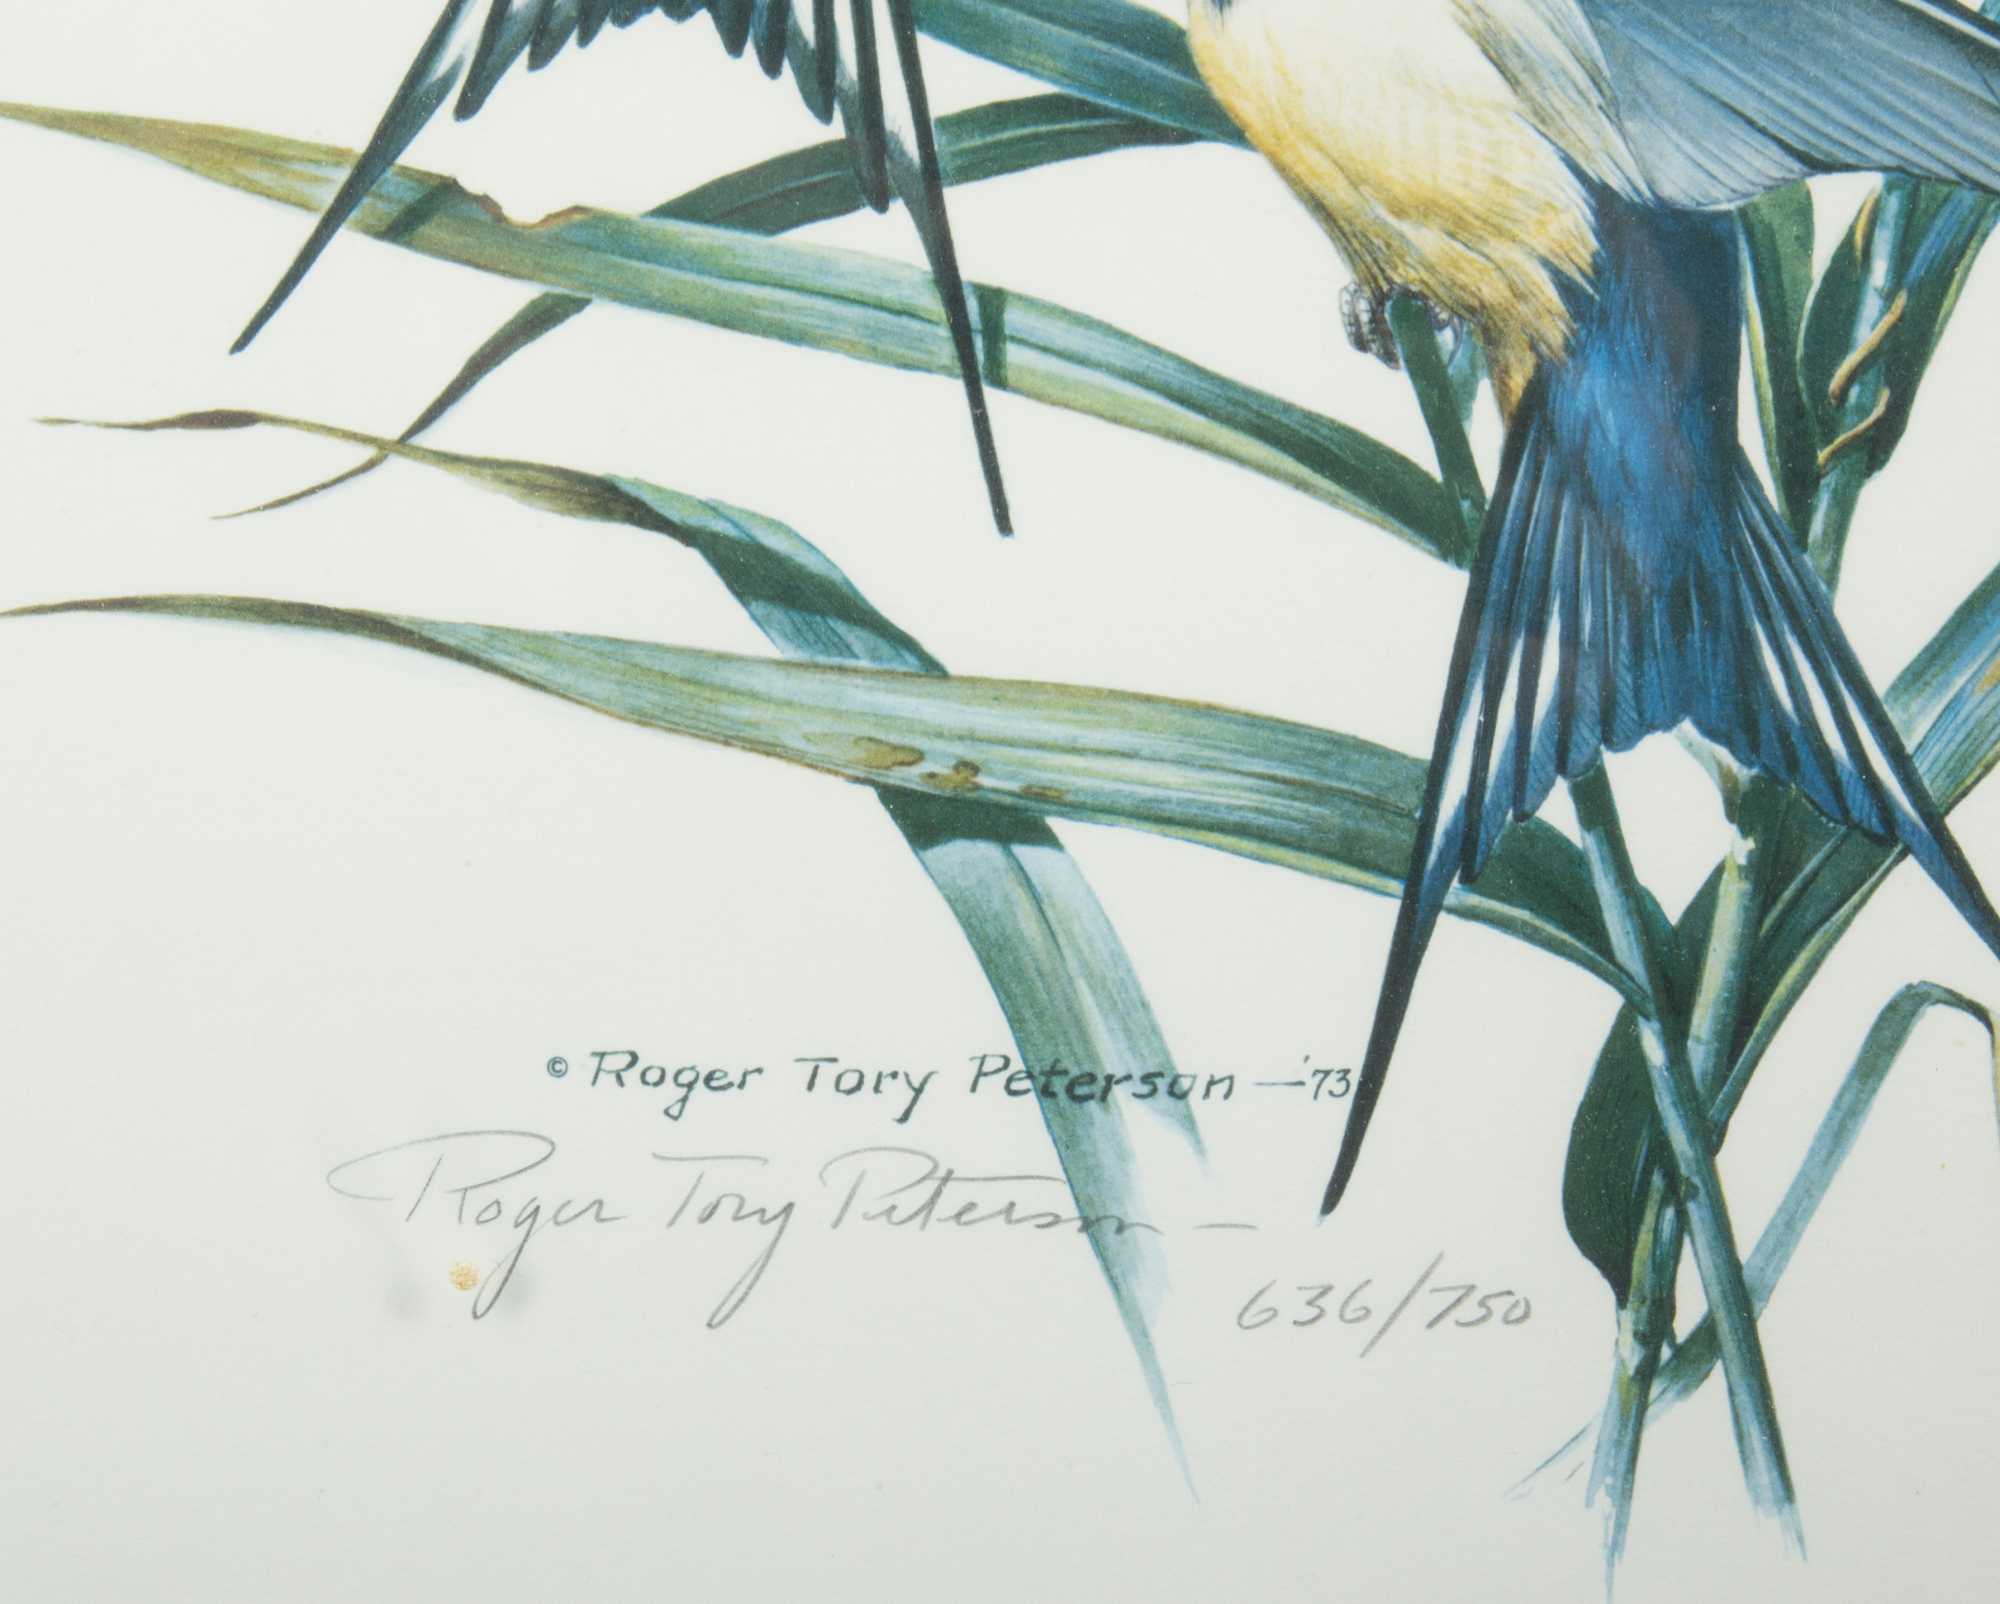 85197 Great Blue Heron by Roger Tory Peterson Tree-Free Greetings EcoArt Wall Plaque 11.25 x 11.25 Inches 